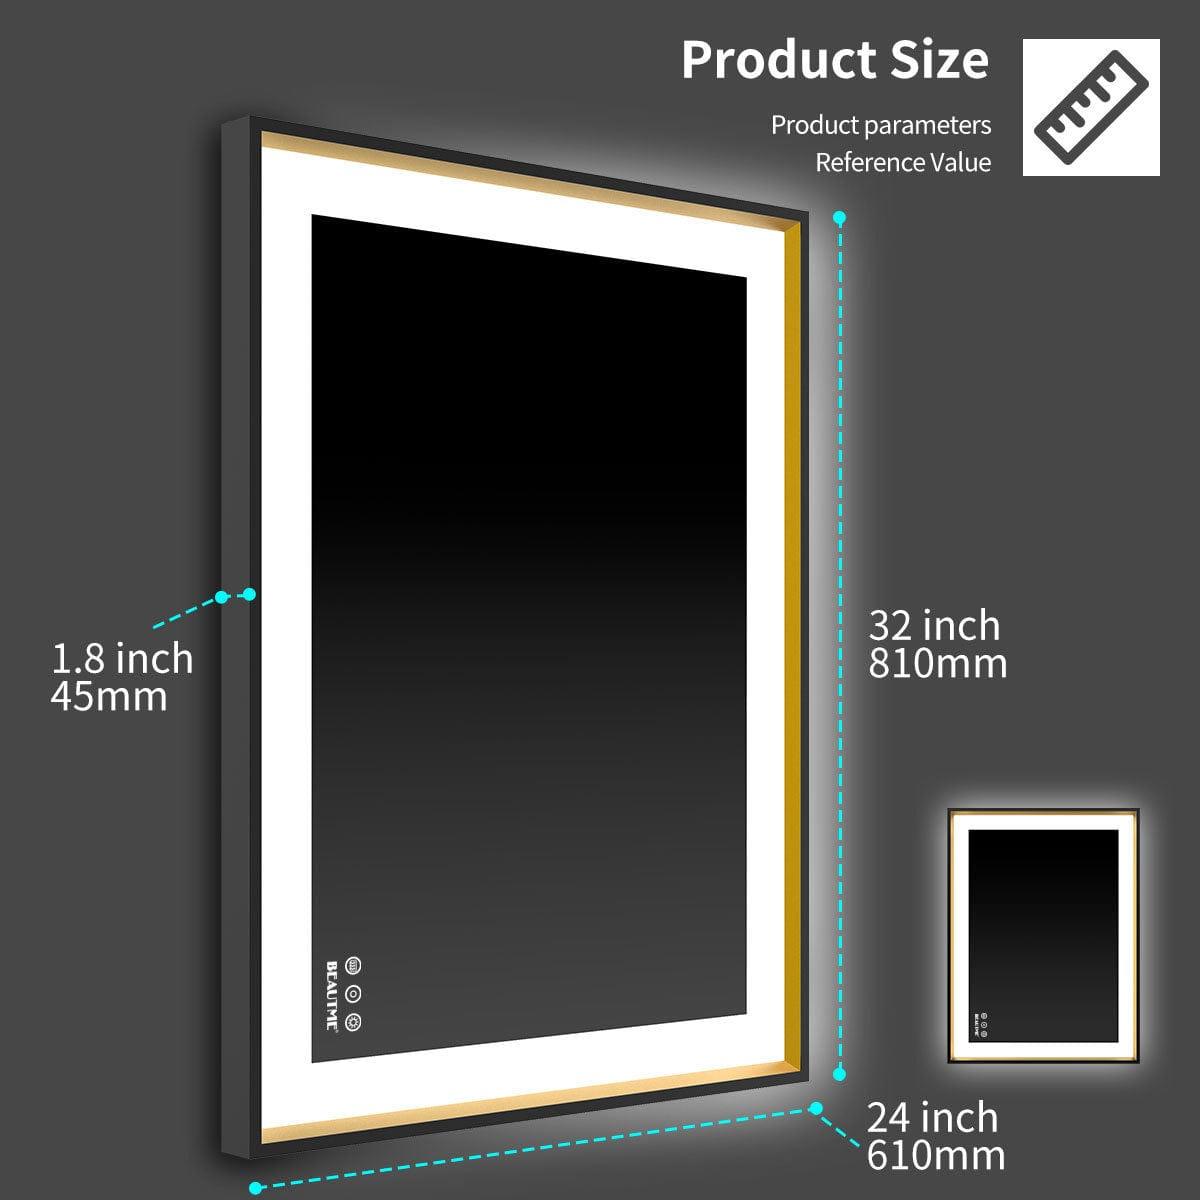 Shop Bathroom Mirror with LED Lights Wall Mounted Anti-Fog Memory Dimmable Touch Sensor Horizontal/Vertical Warm White/Daylight LightsHorizontal/Vertical Mademoiselle Home Decor